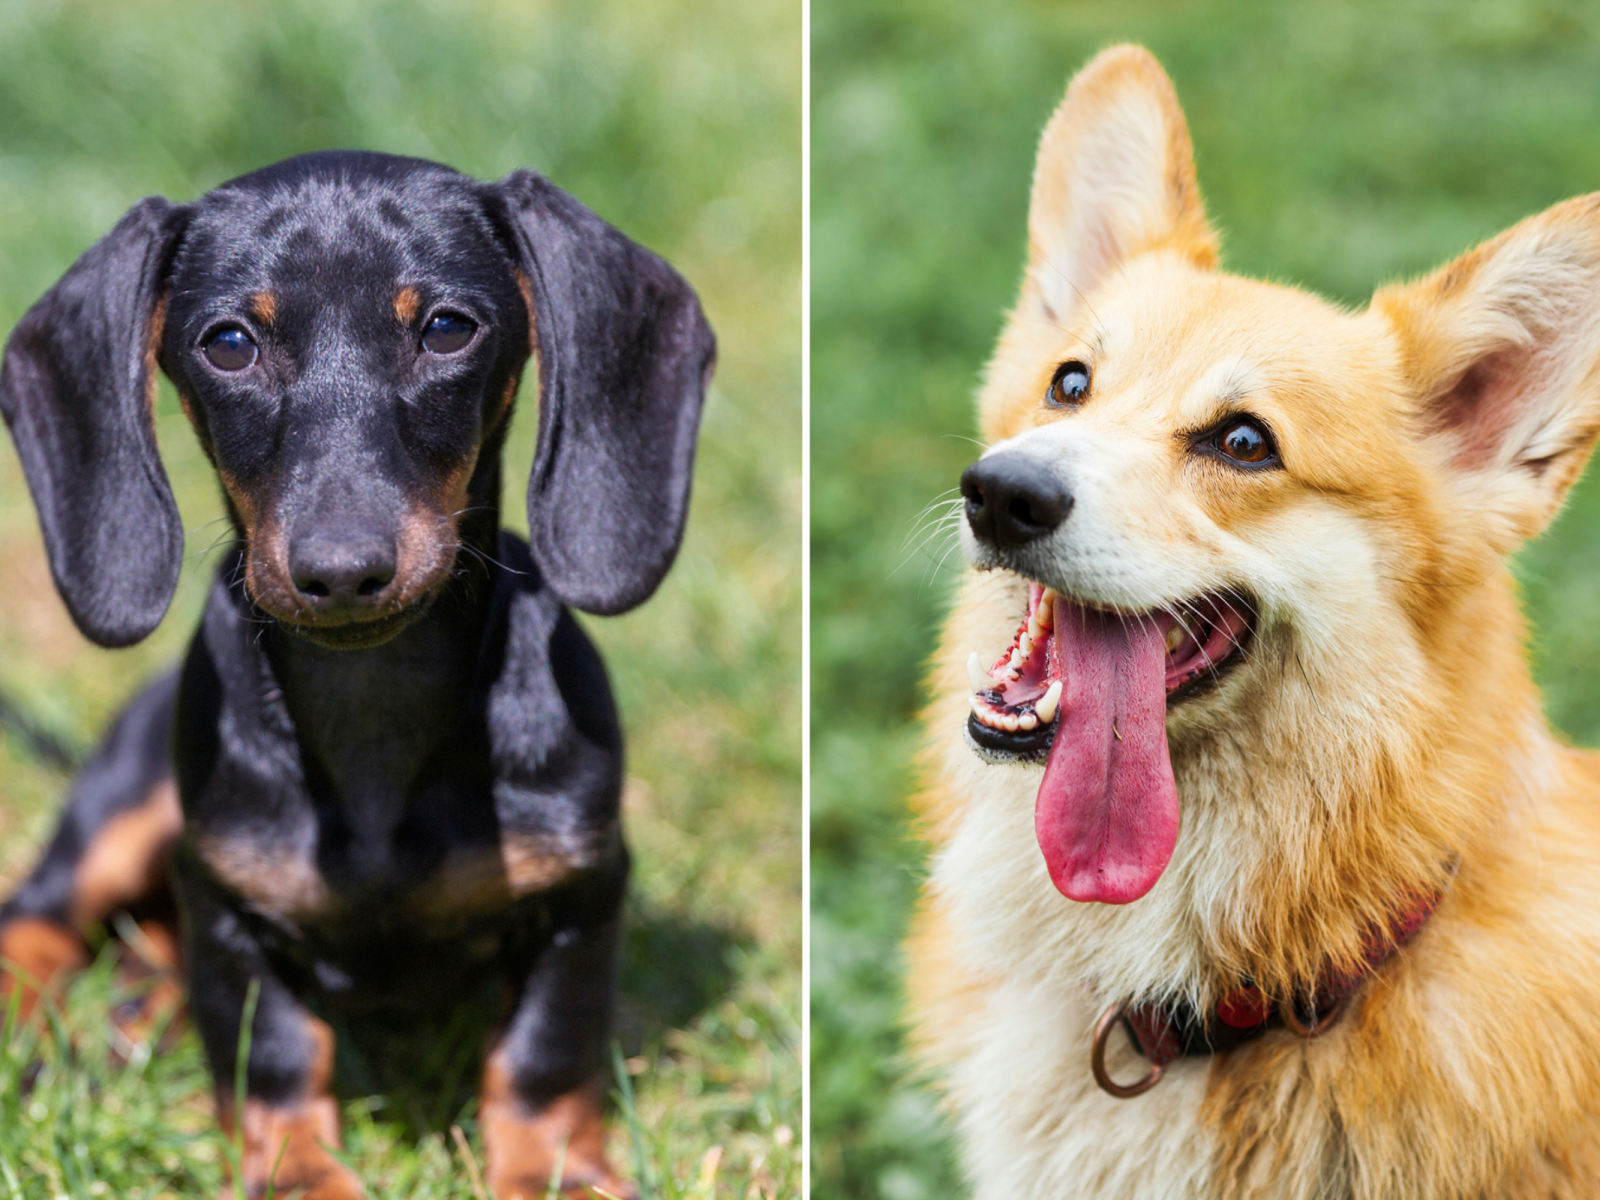 People Obsessed With Dachshund x Corgi Mix: 'What a Beautiful